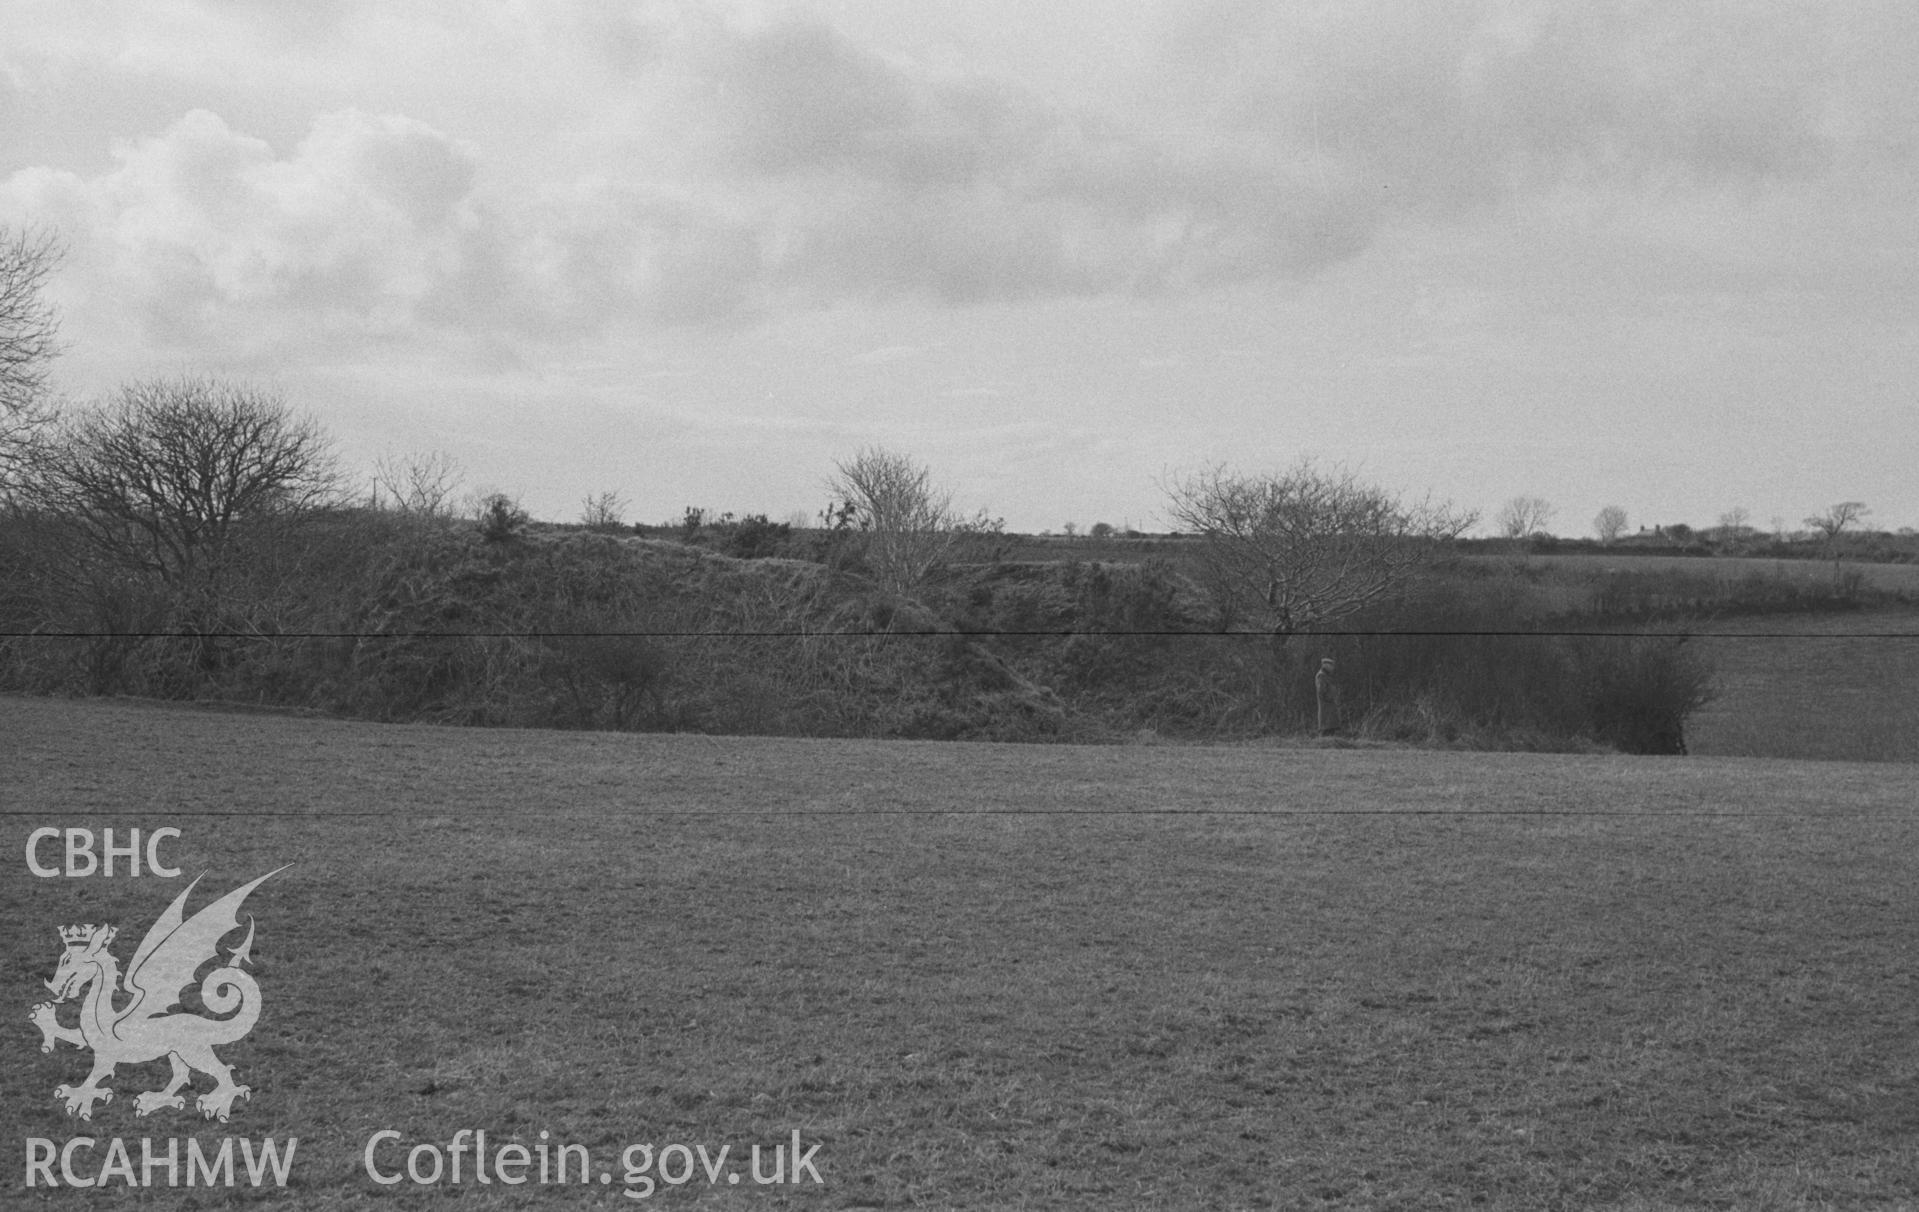 Digital copy of a black and white negative showing Norman motte 100m north east of the site of St Mary's church Llanfair Trefhelygen. Photographed in April 1963 by Arthur O. Chater from Grid Reference SN 3445 4417, looking north north west.